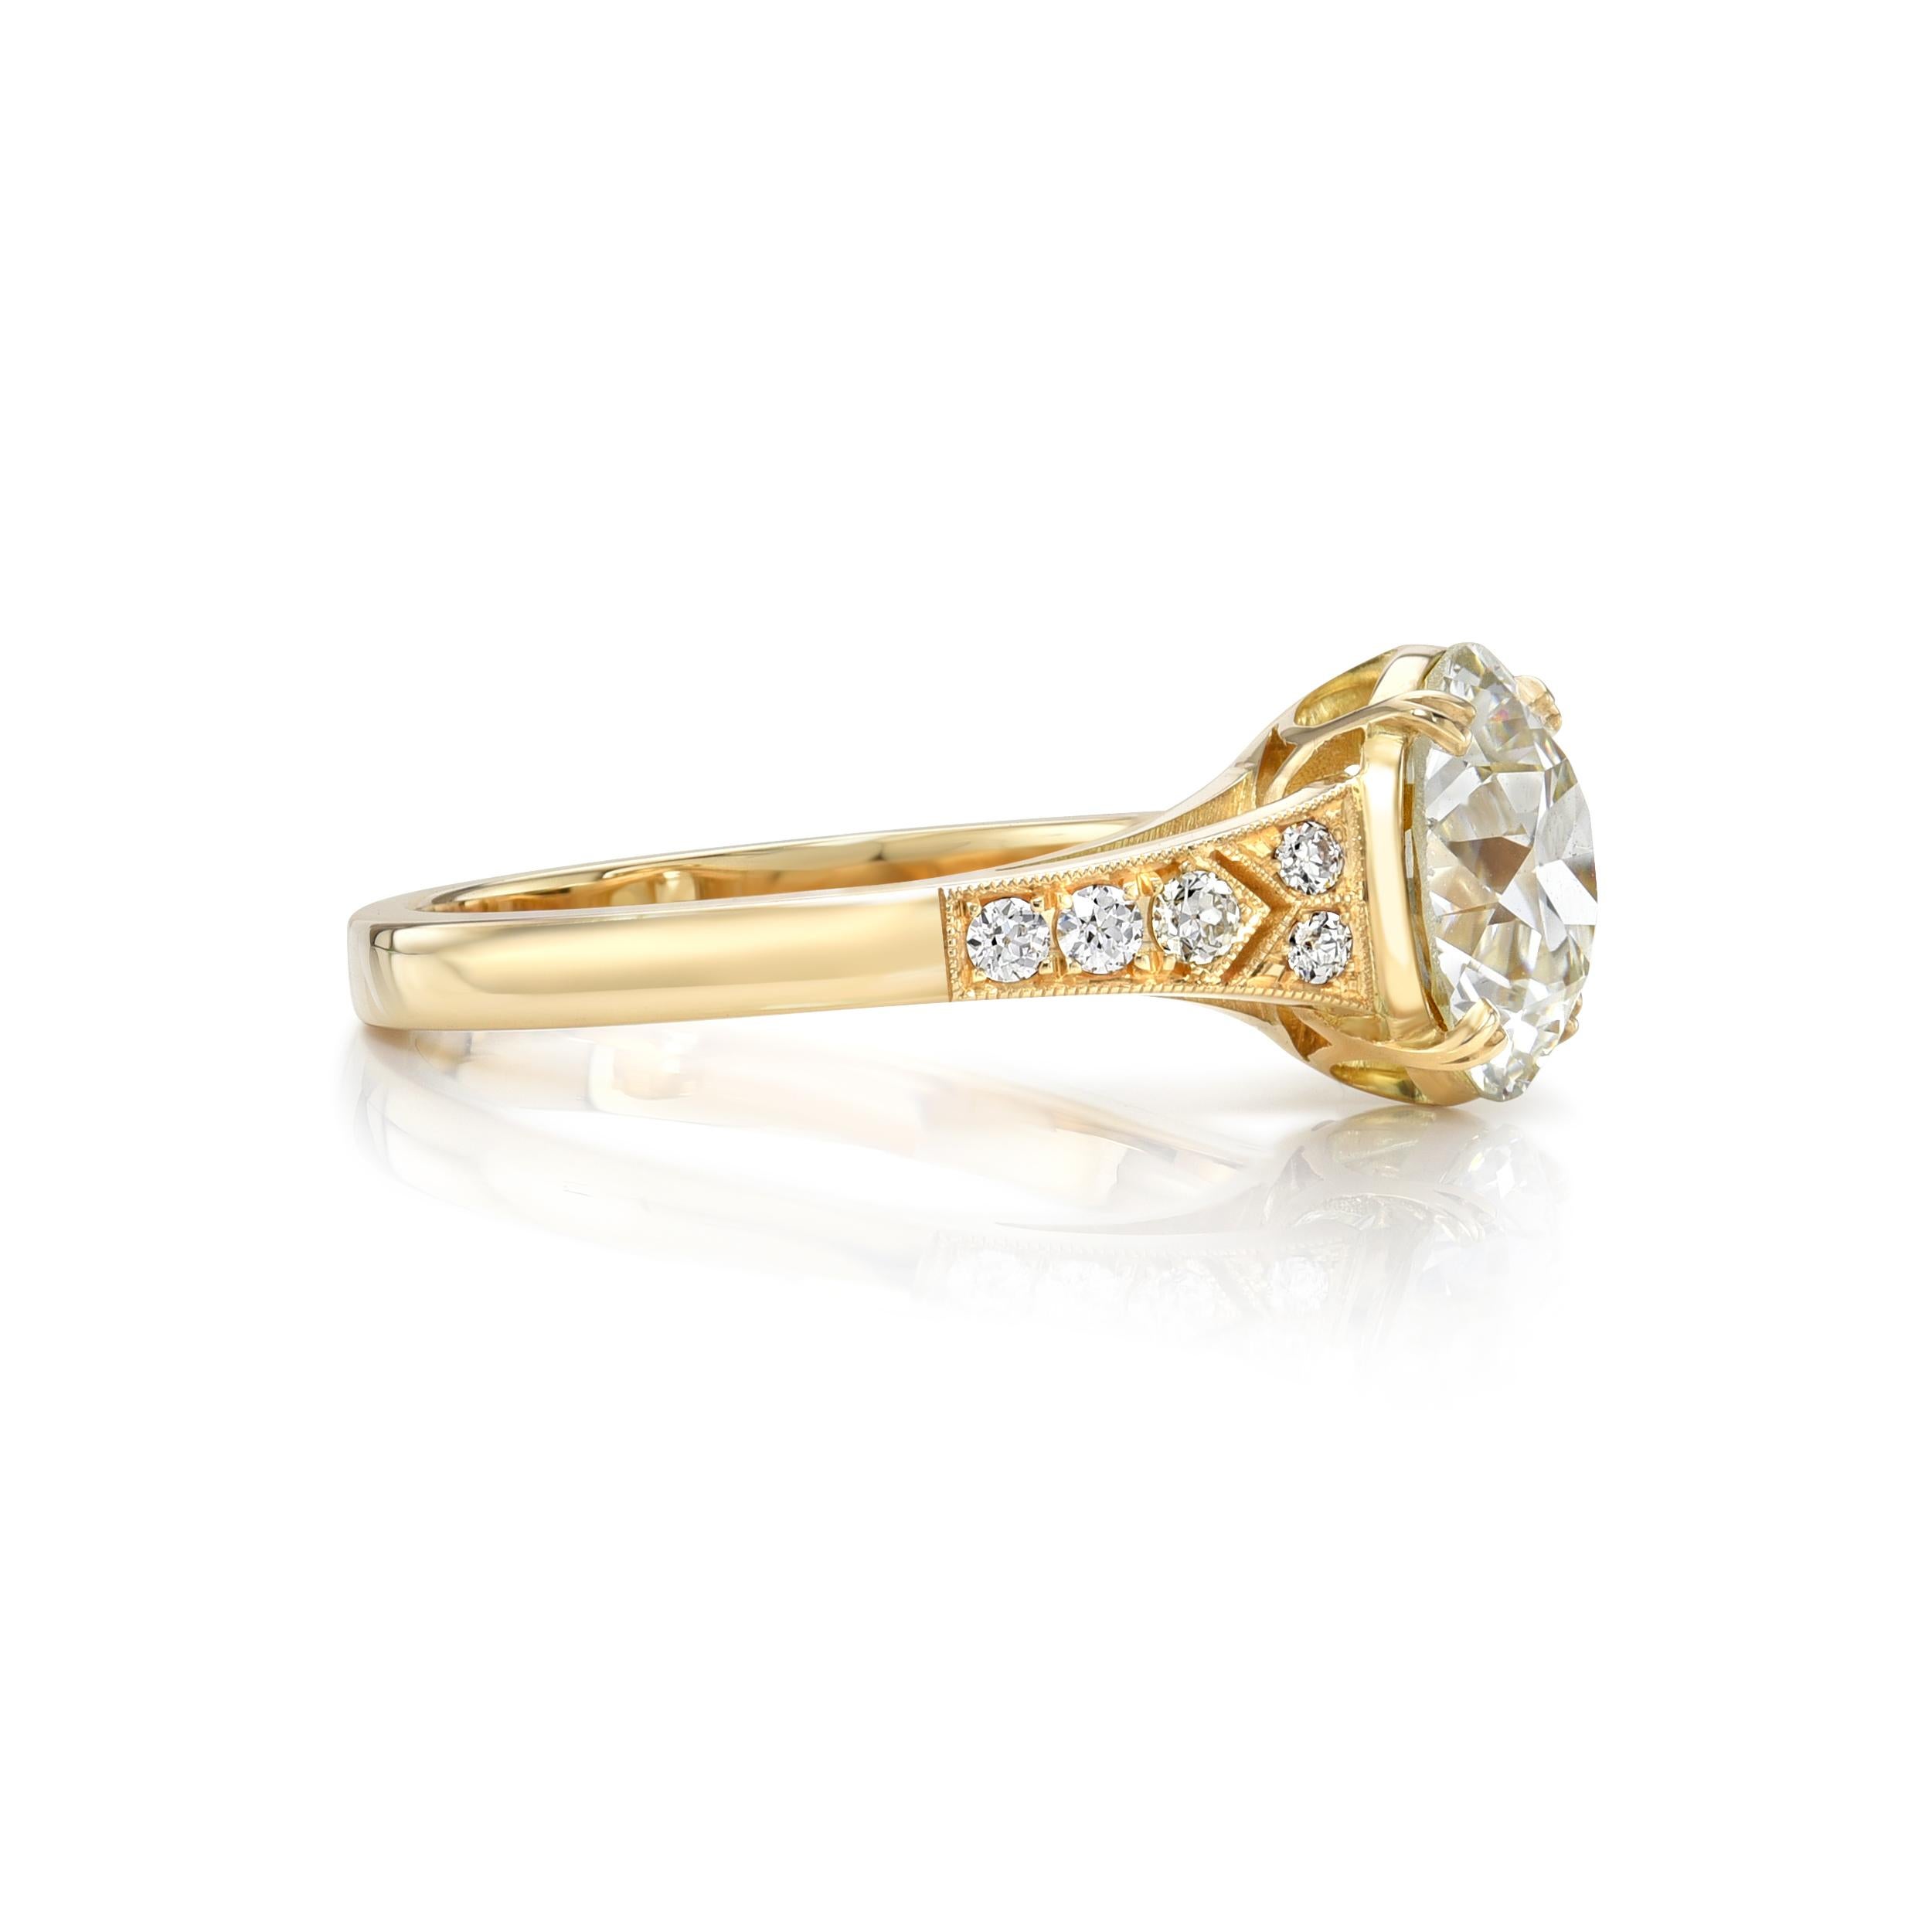 2.37ct K/VVS2 GIA certified old European cut diamond with 0.09ctw old European cut accent diamonds prong set in a handcrafted 18K yellow gold mounting.